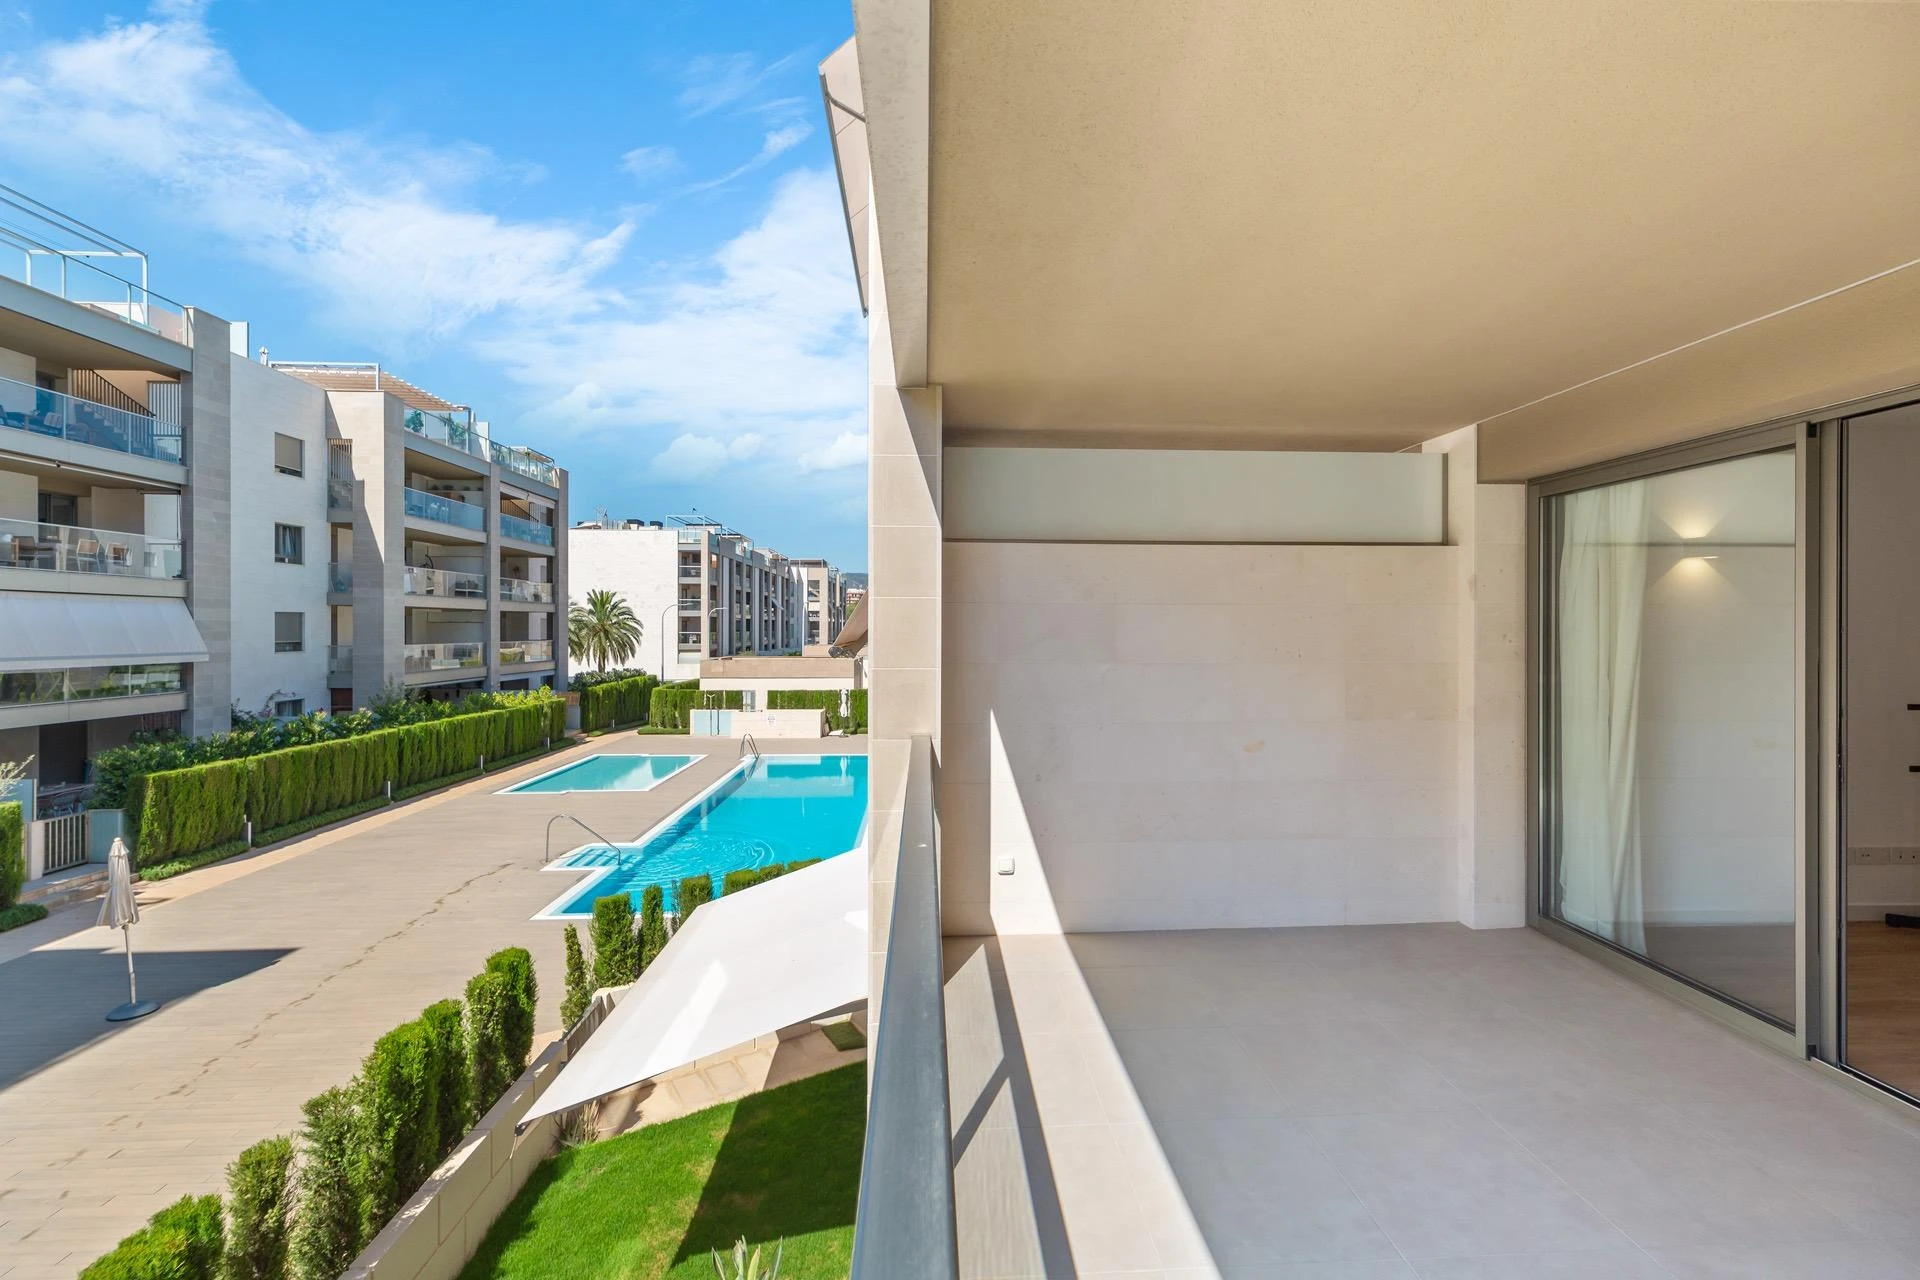 Moderna apartment in a well-kept complex with swimming pools and green areas in Palma